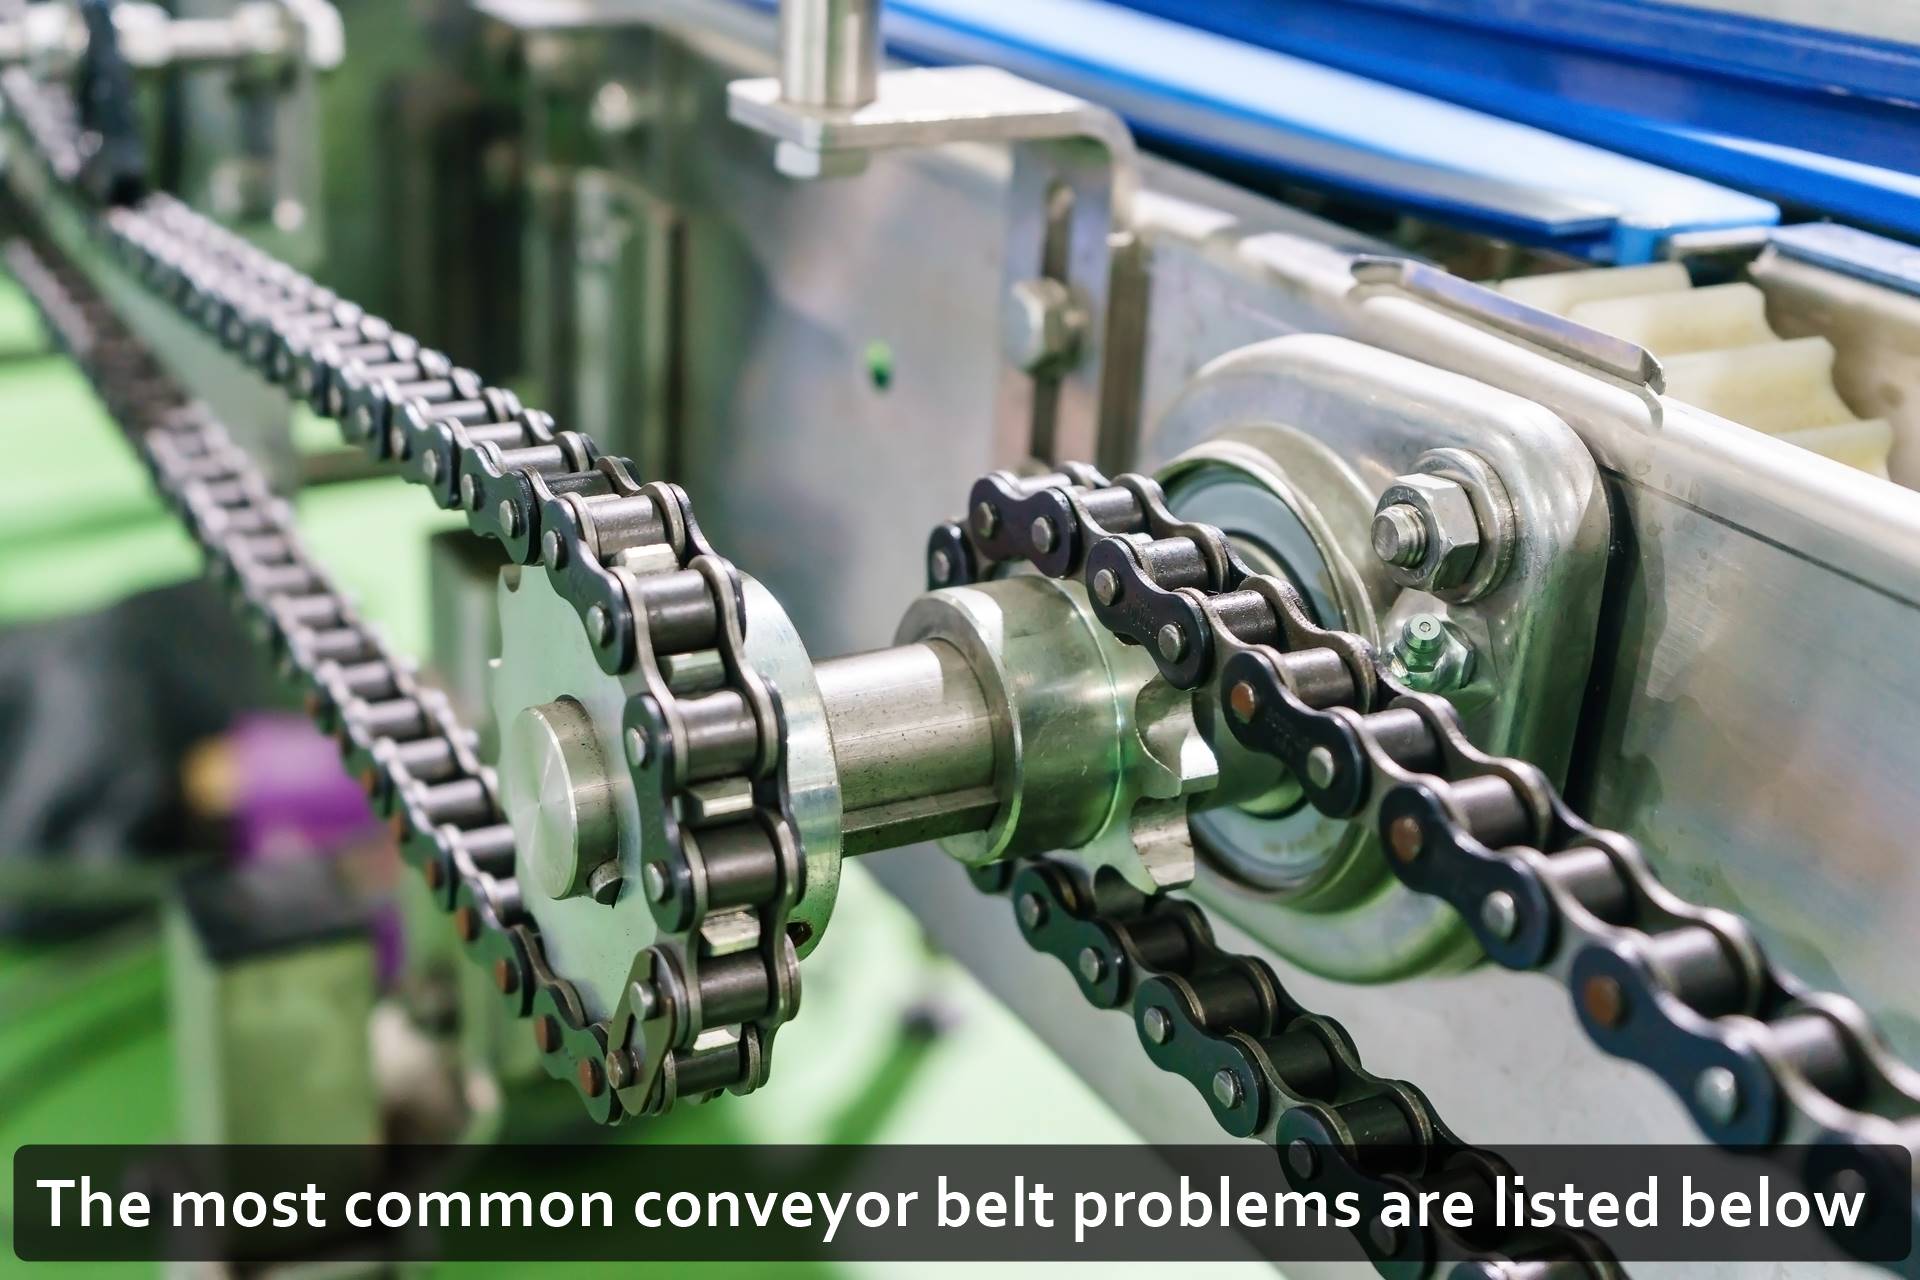 The most common conveyor belt problems are listed below